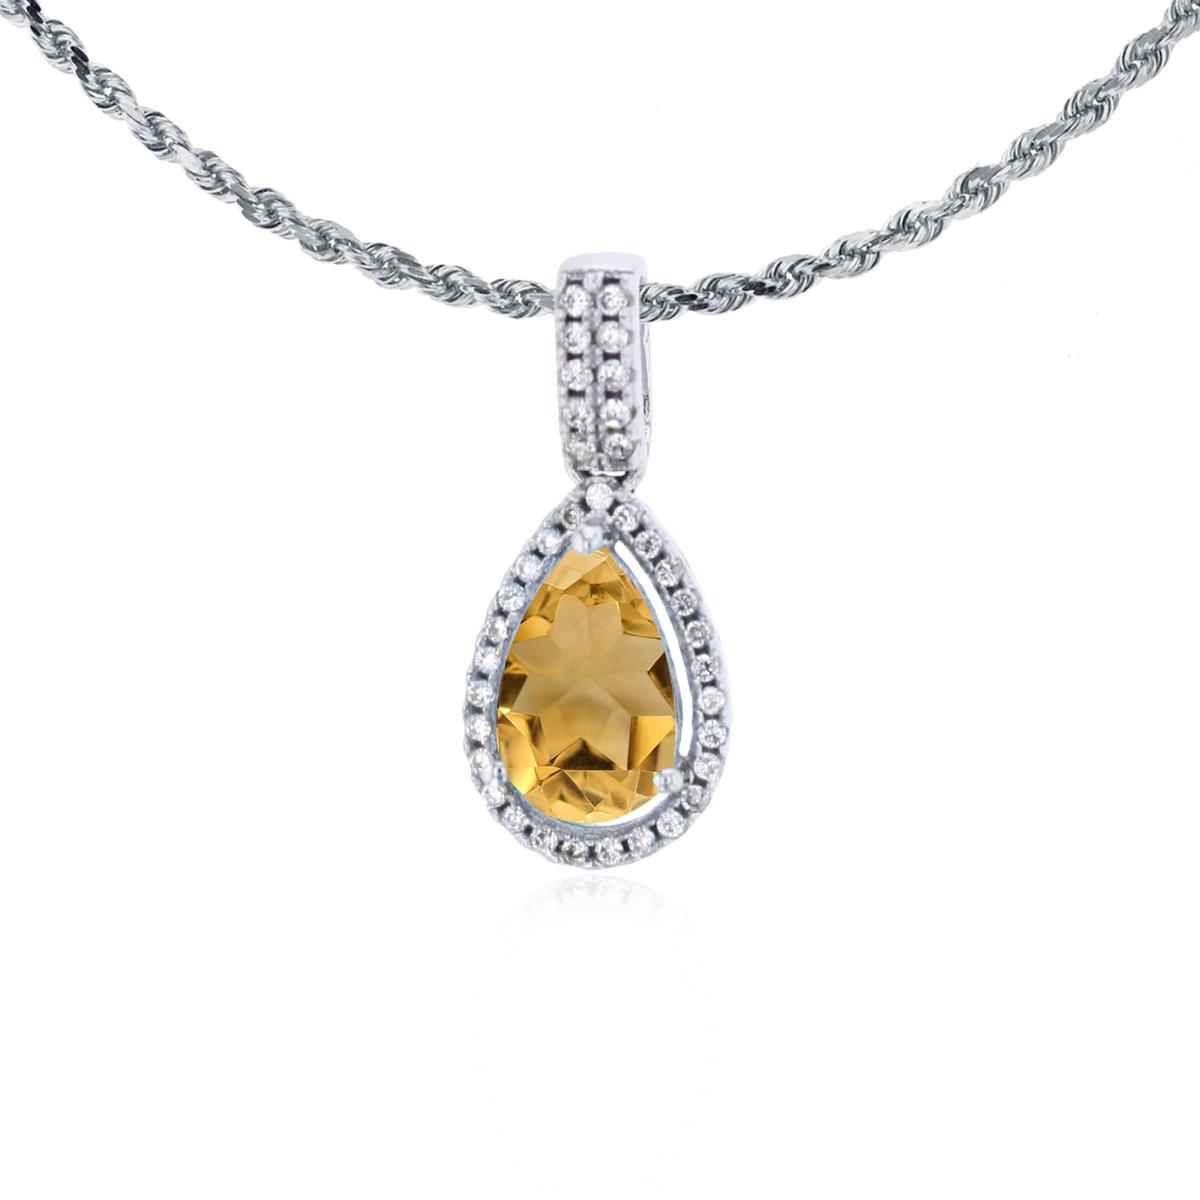 10K White Gold 8x5mm Pear Cut Citrine & 0.11 CTTW Diamond Halo 18" Rope Chain Necklace